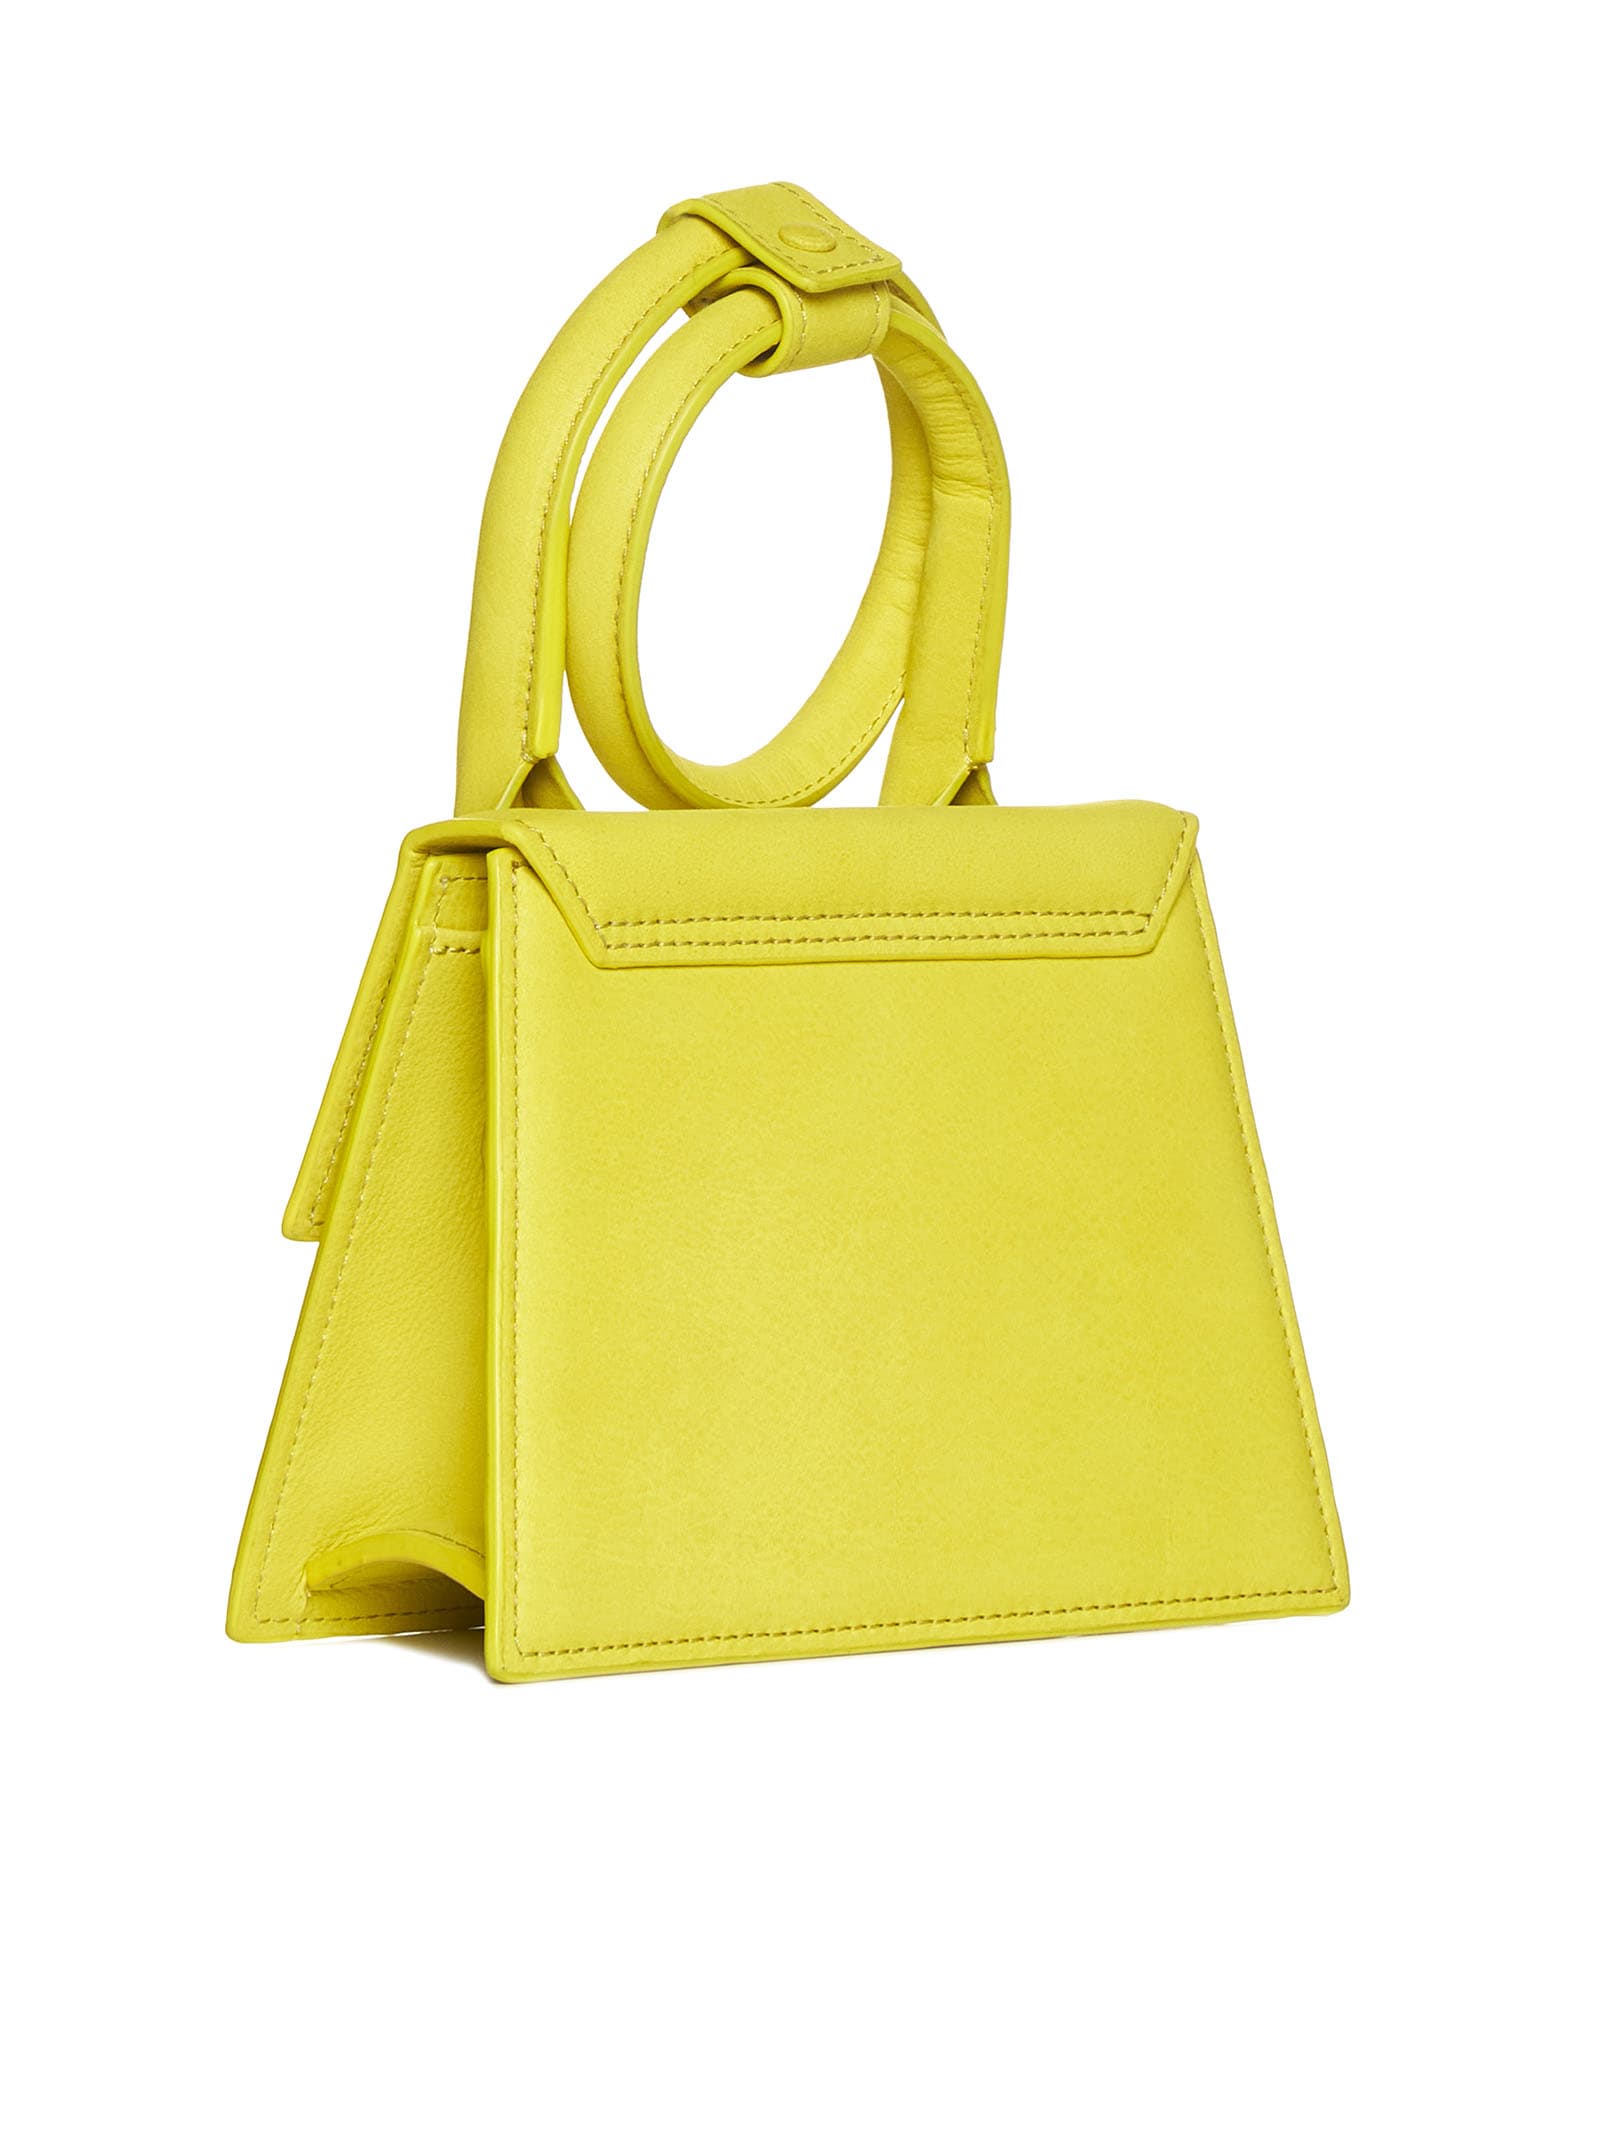 Jacquemus Le Chiquito Textured-leather Bag in Green